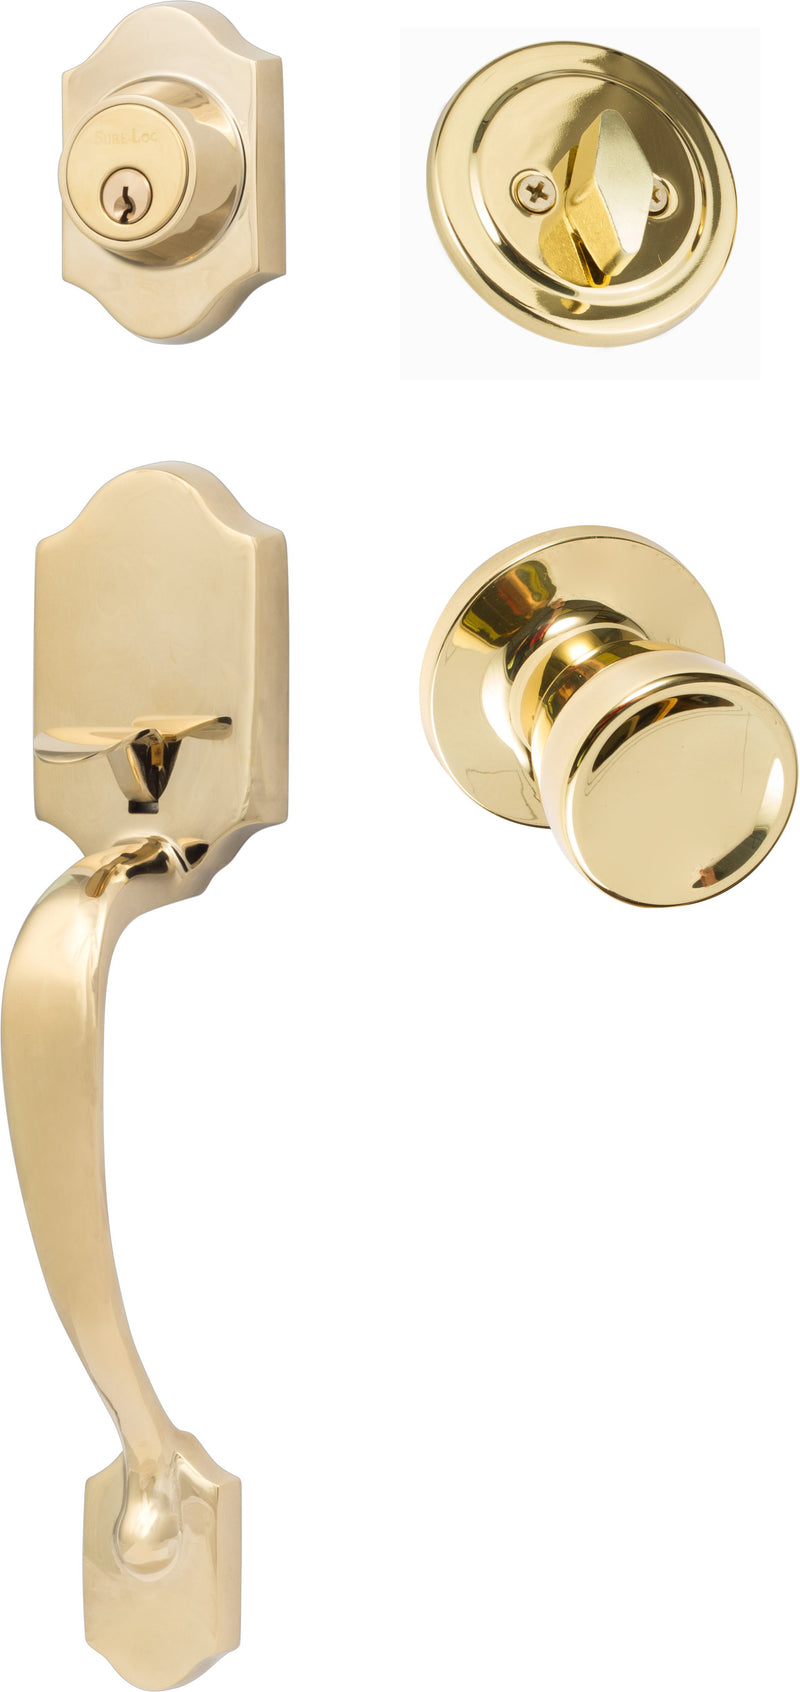 Sure-Loc Coral Handleset With Tulip Knob Interior Trim in Polished Brass finish